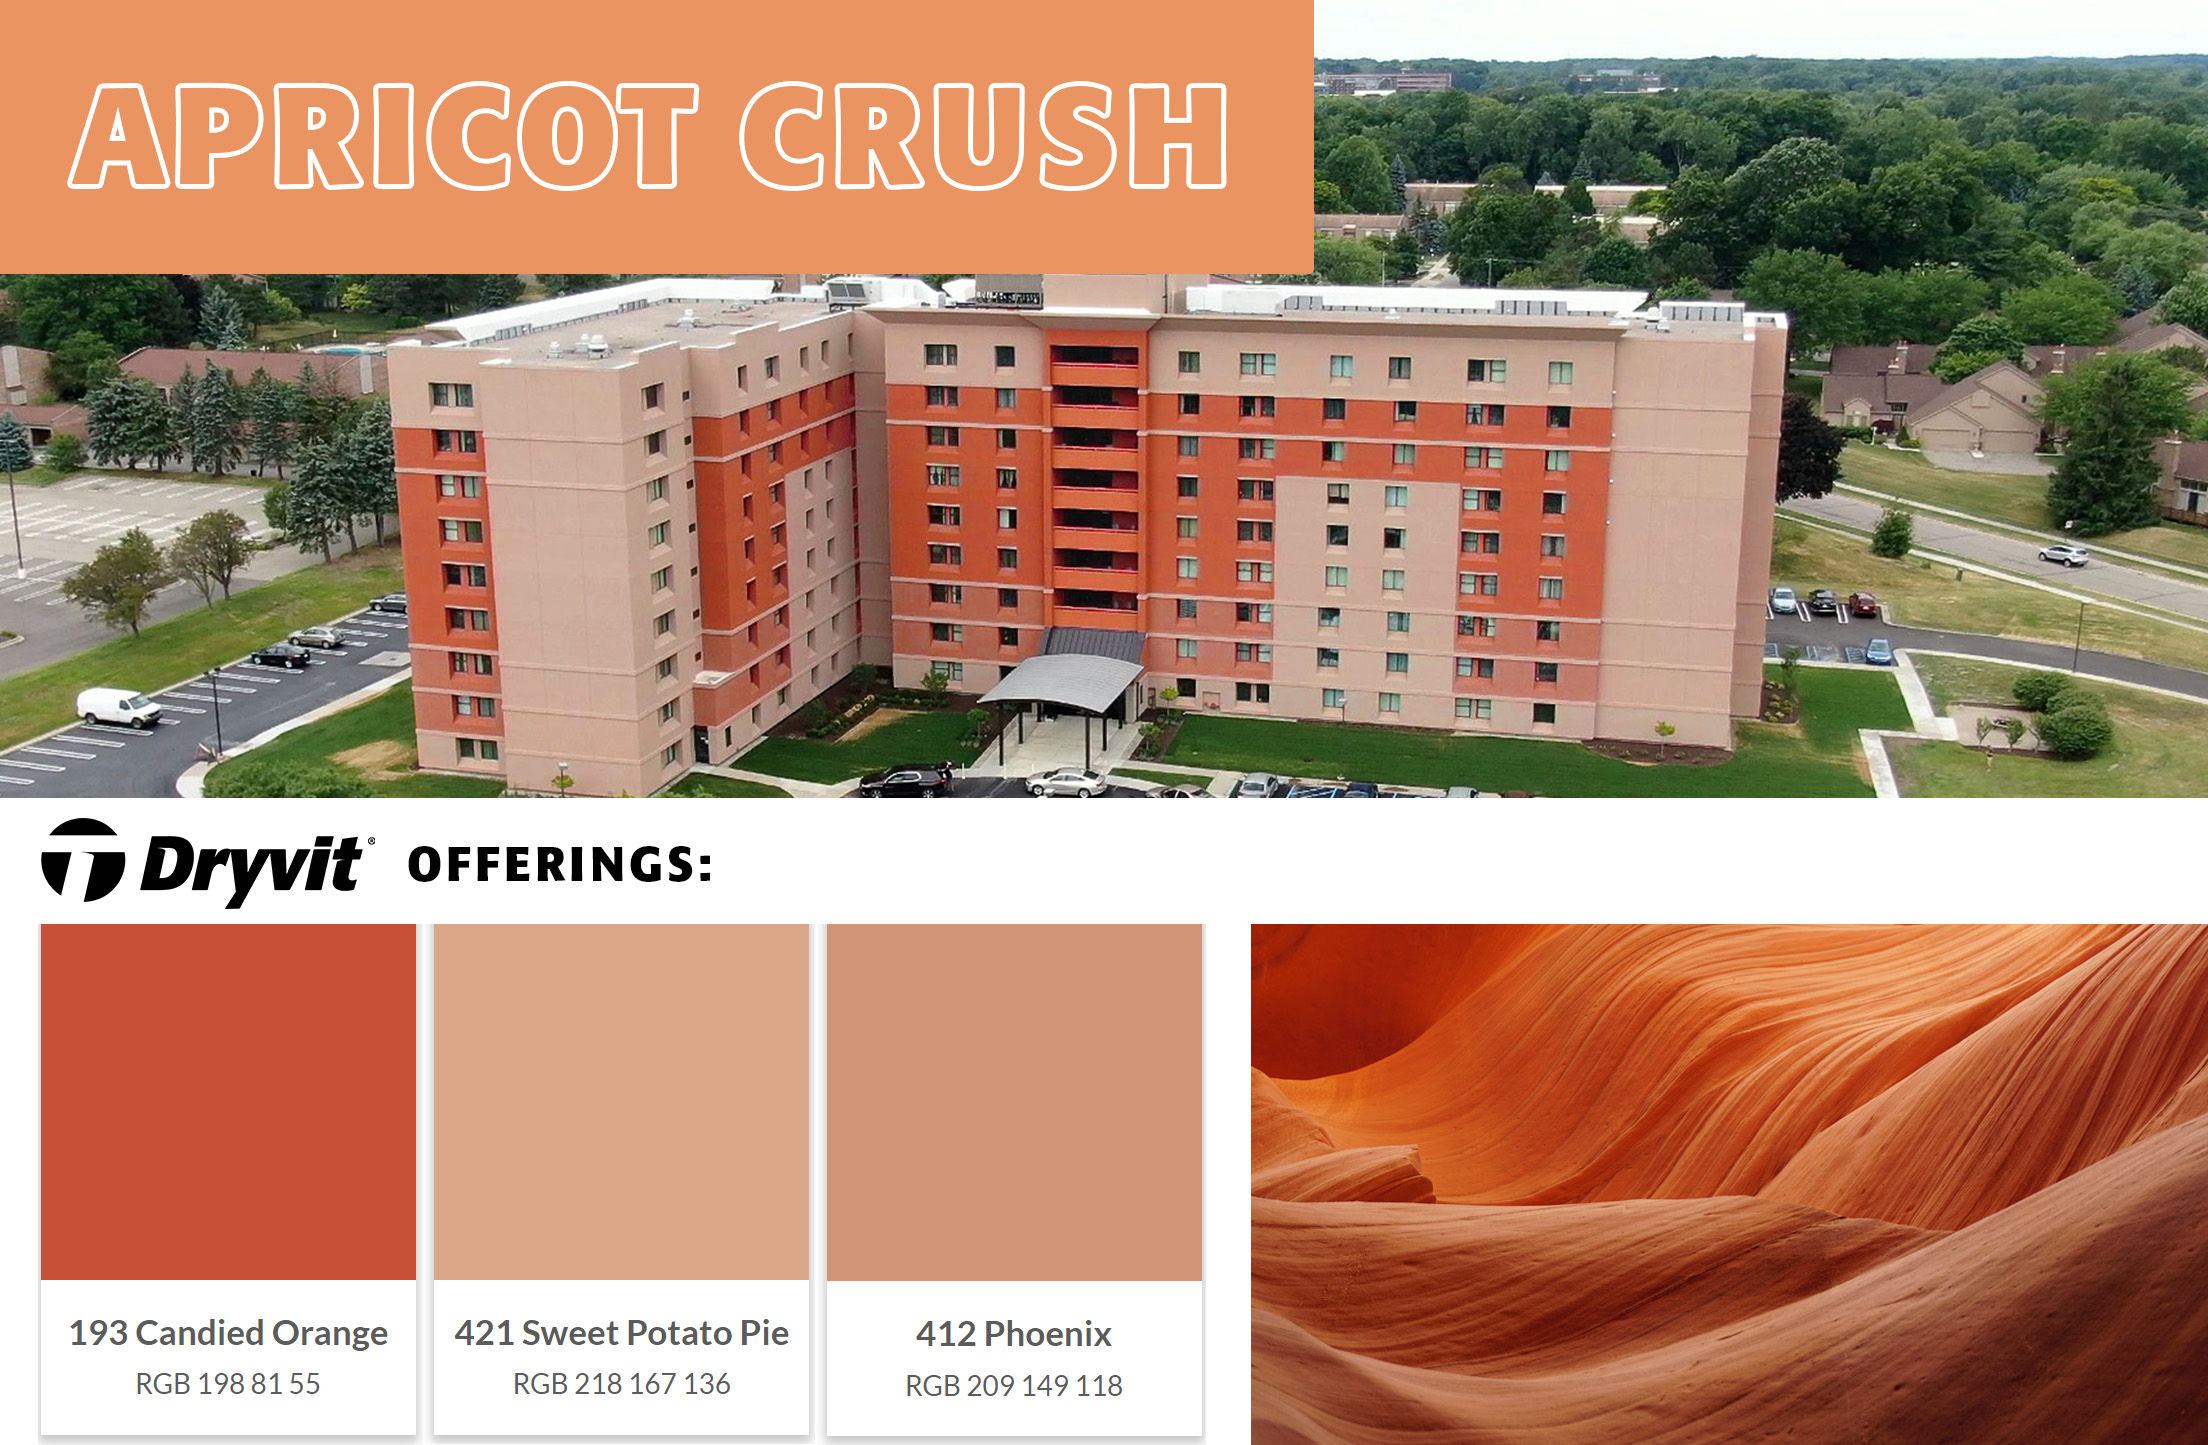 a collage of images showing a soft orange shade. Images include a canyon and a multistory residential building with Dryvit EIFS options in a soft orange